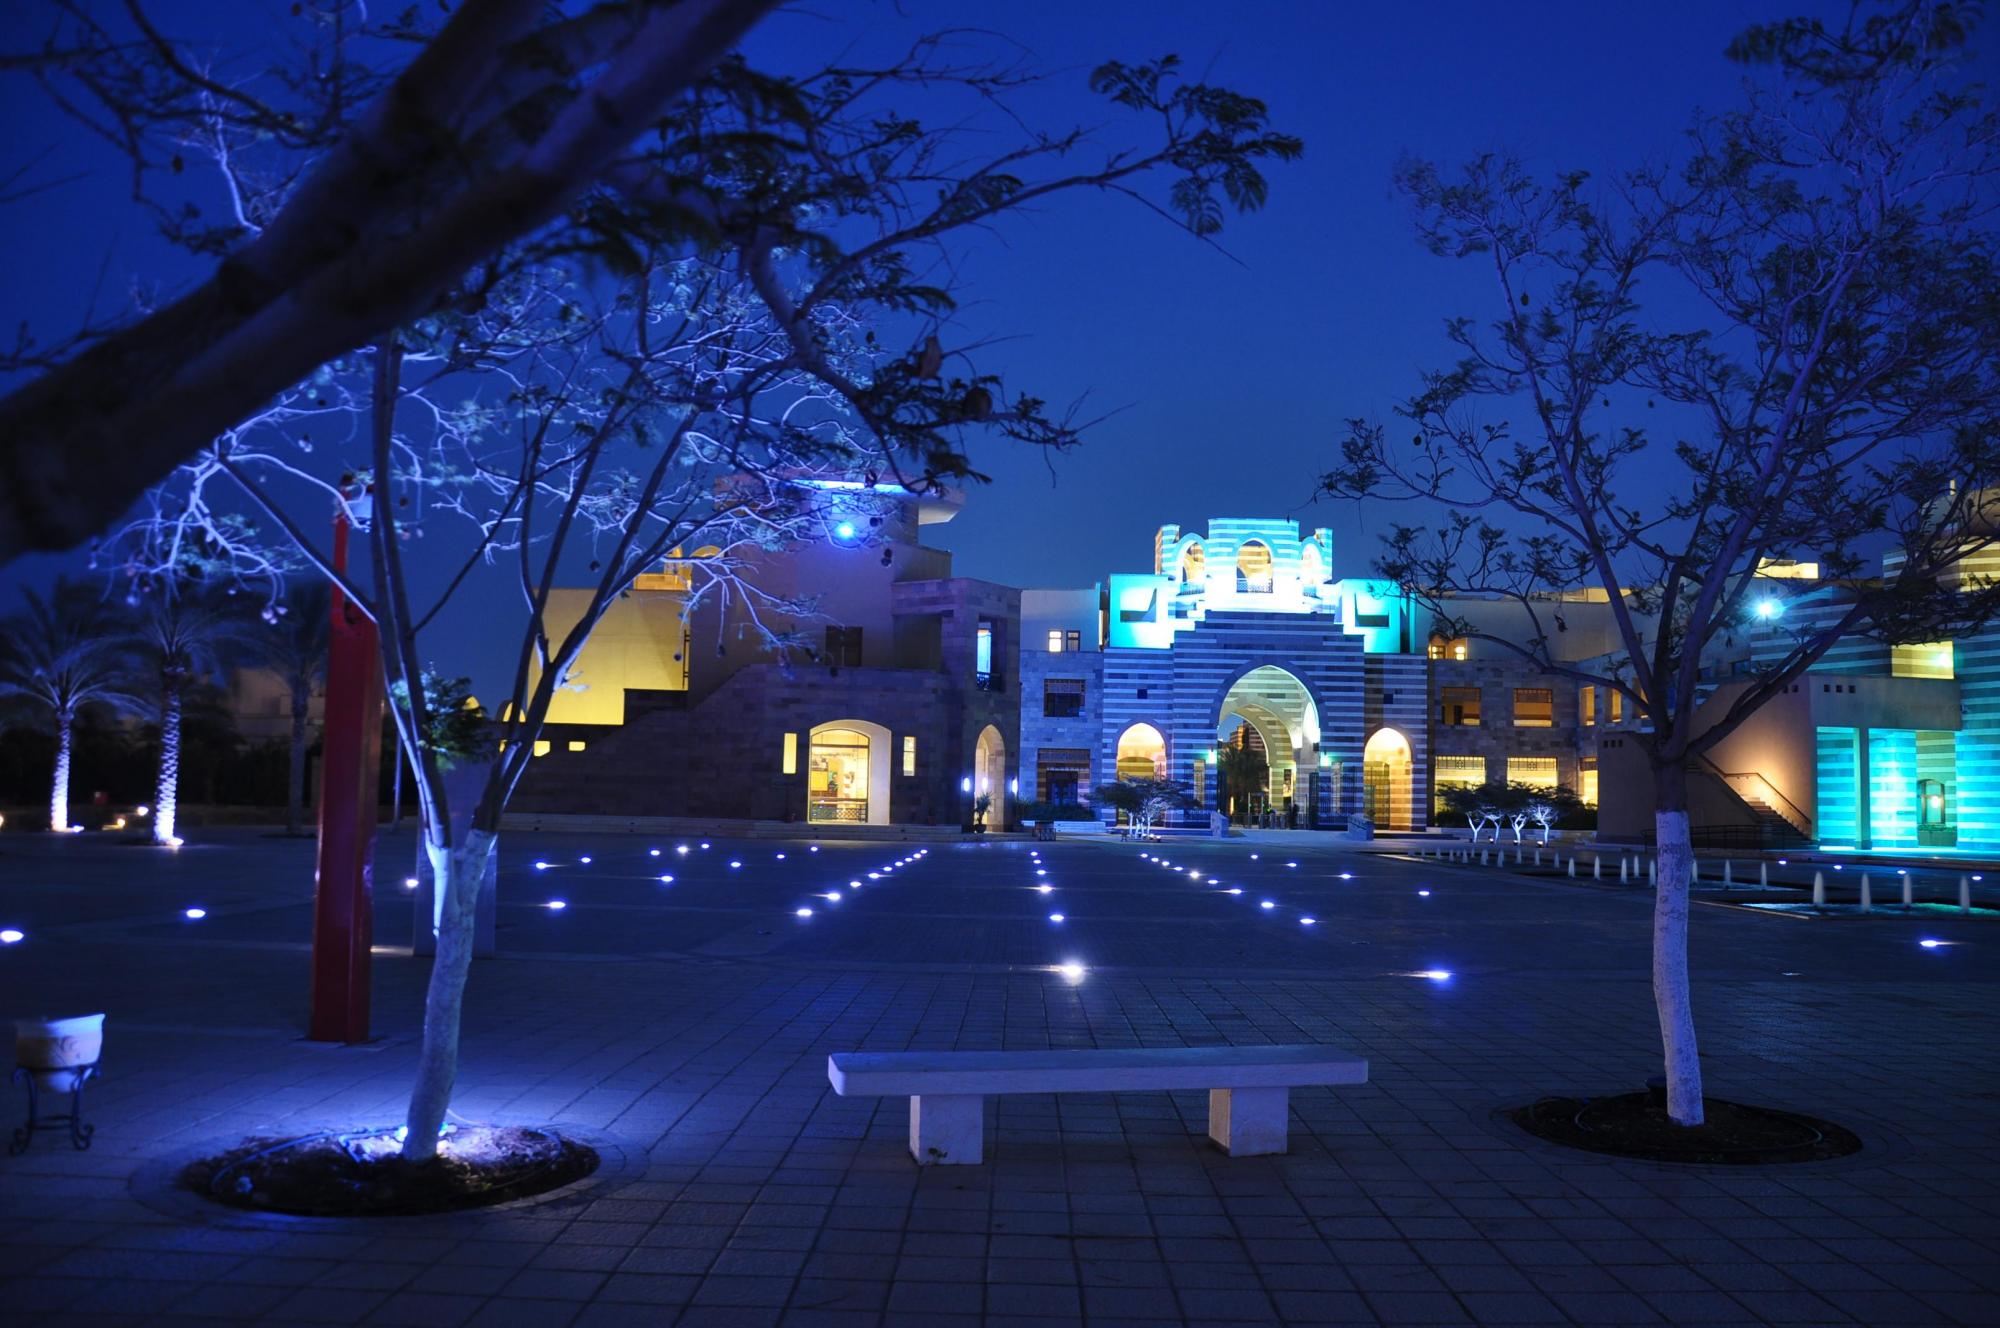 Every year the AUC portal lights up blue for World Autism Awareness Day